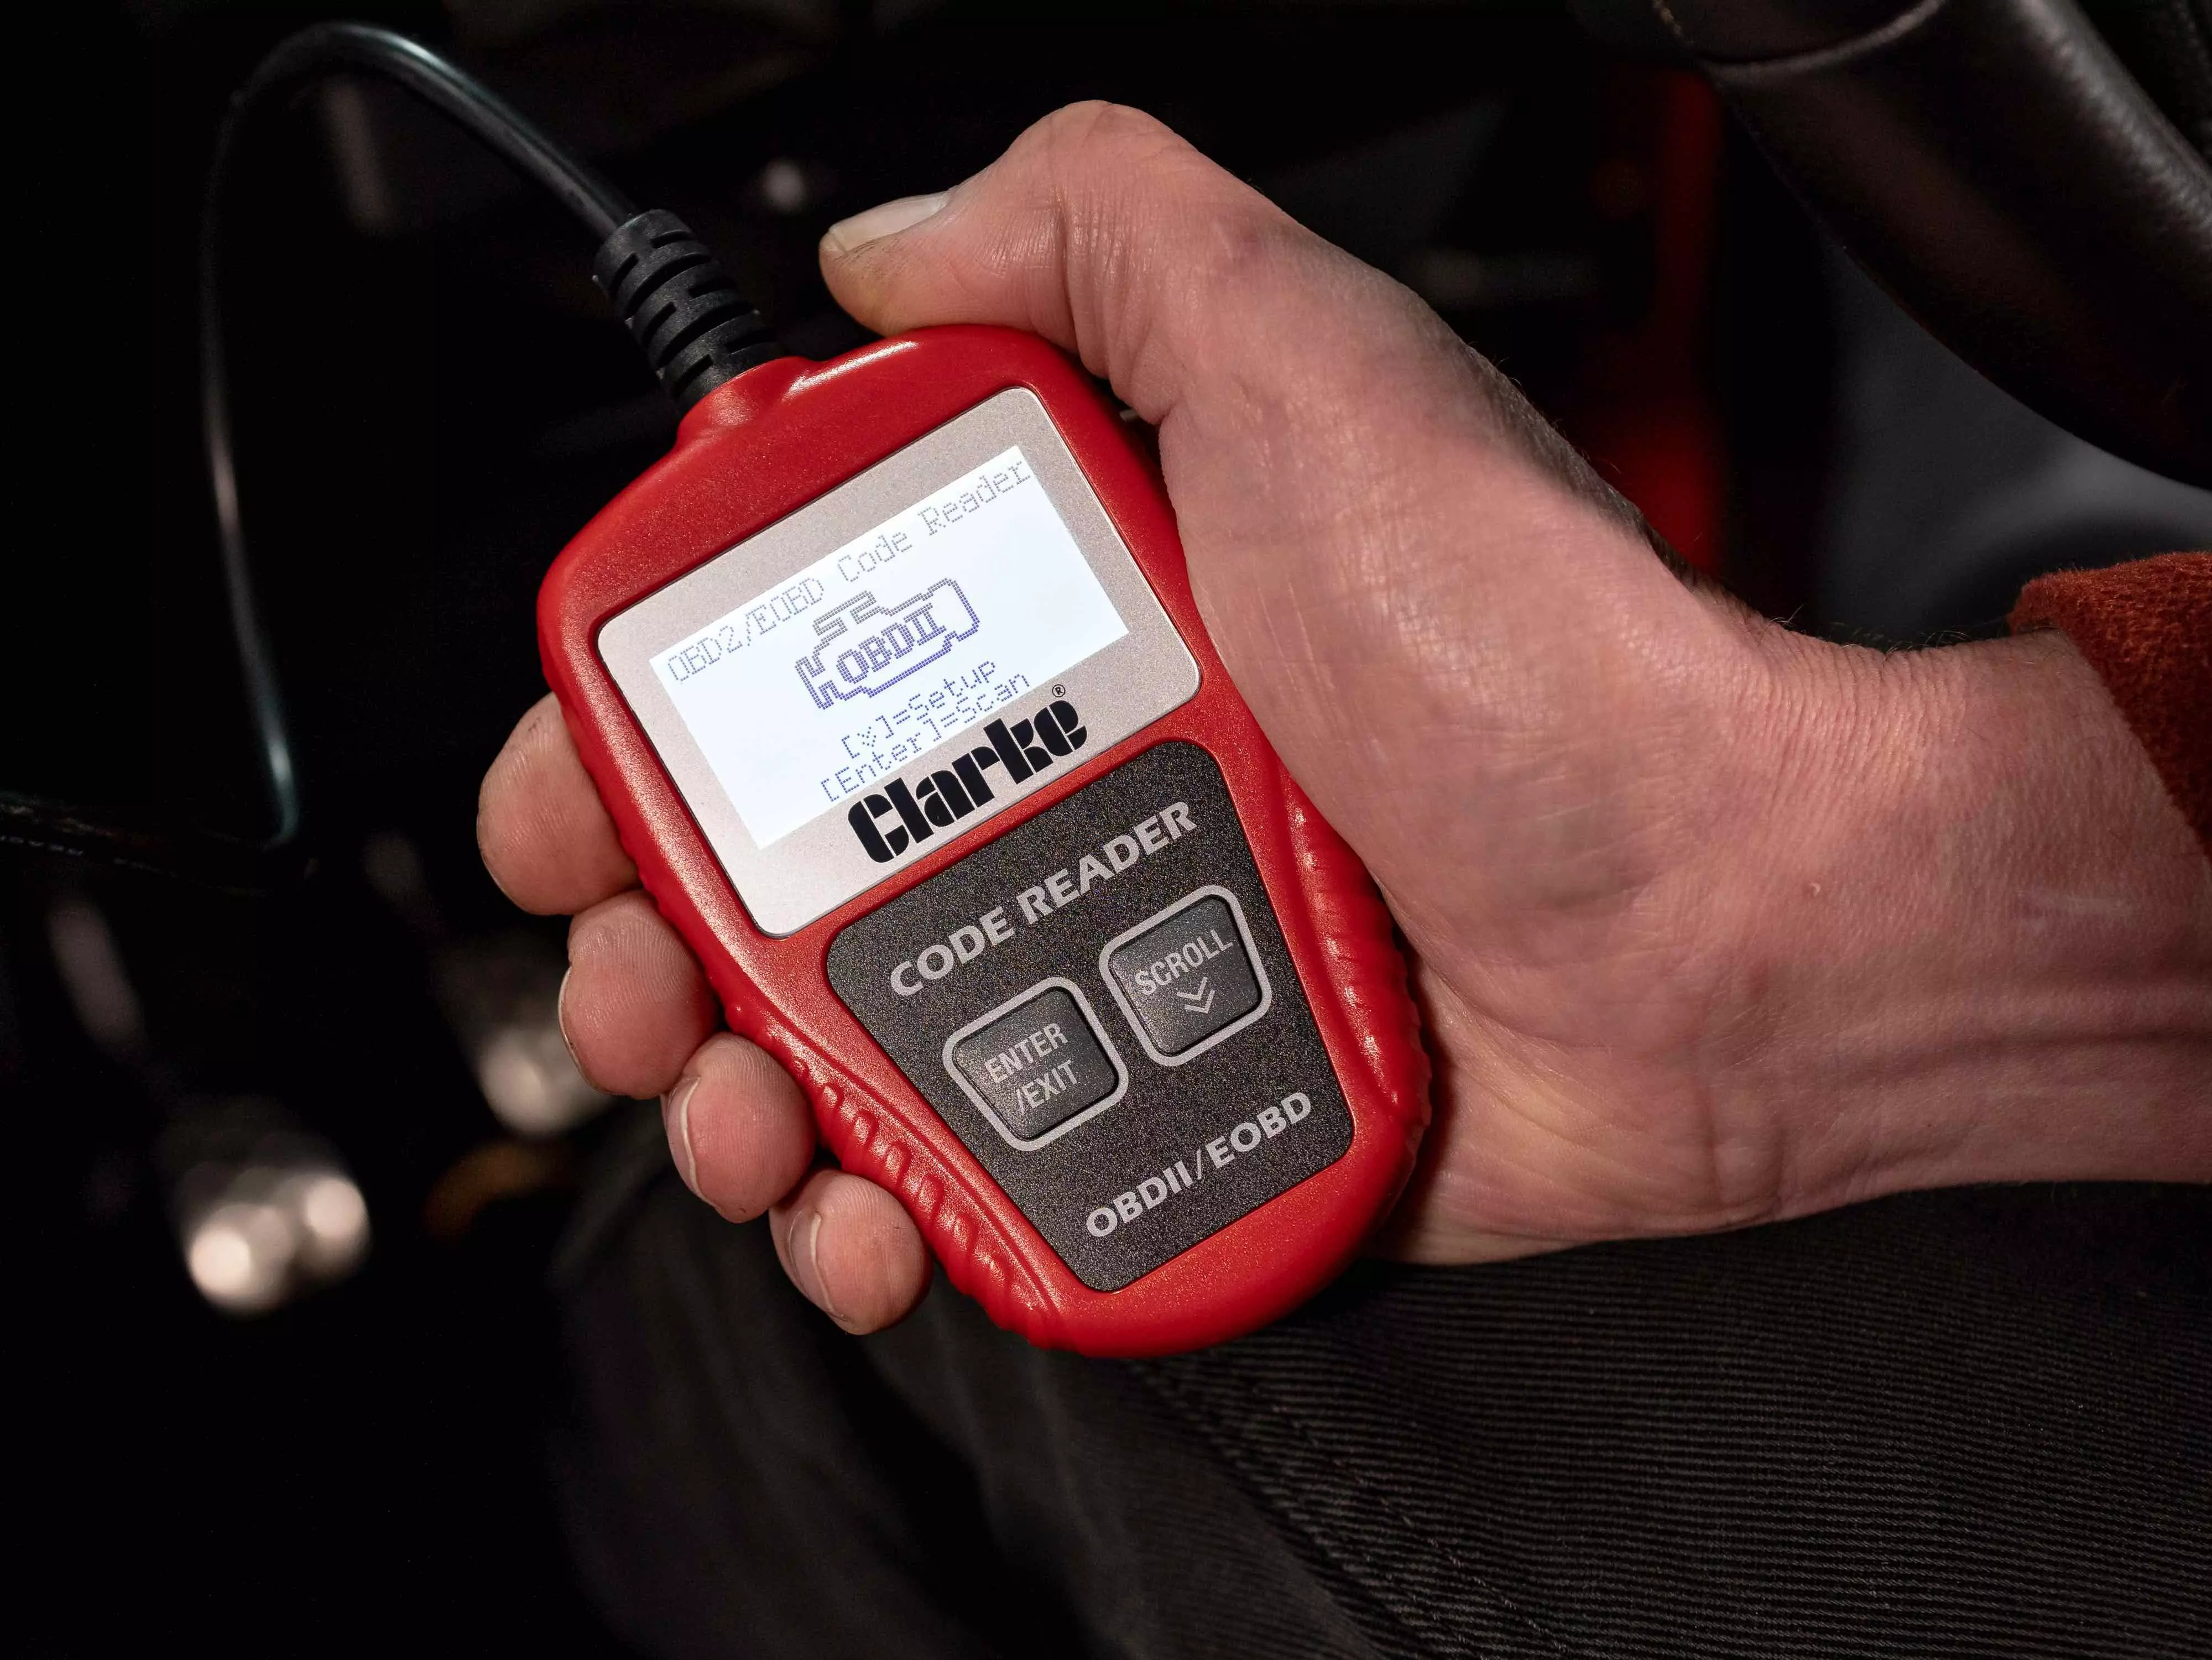 OBD Readers & Ports Explained